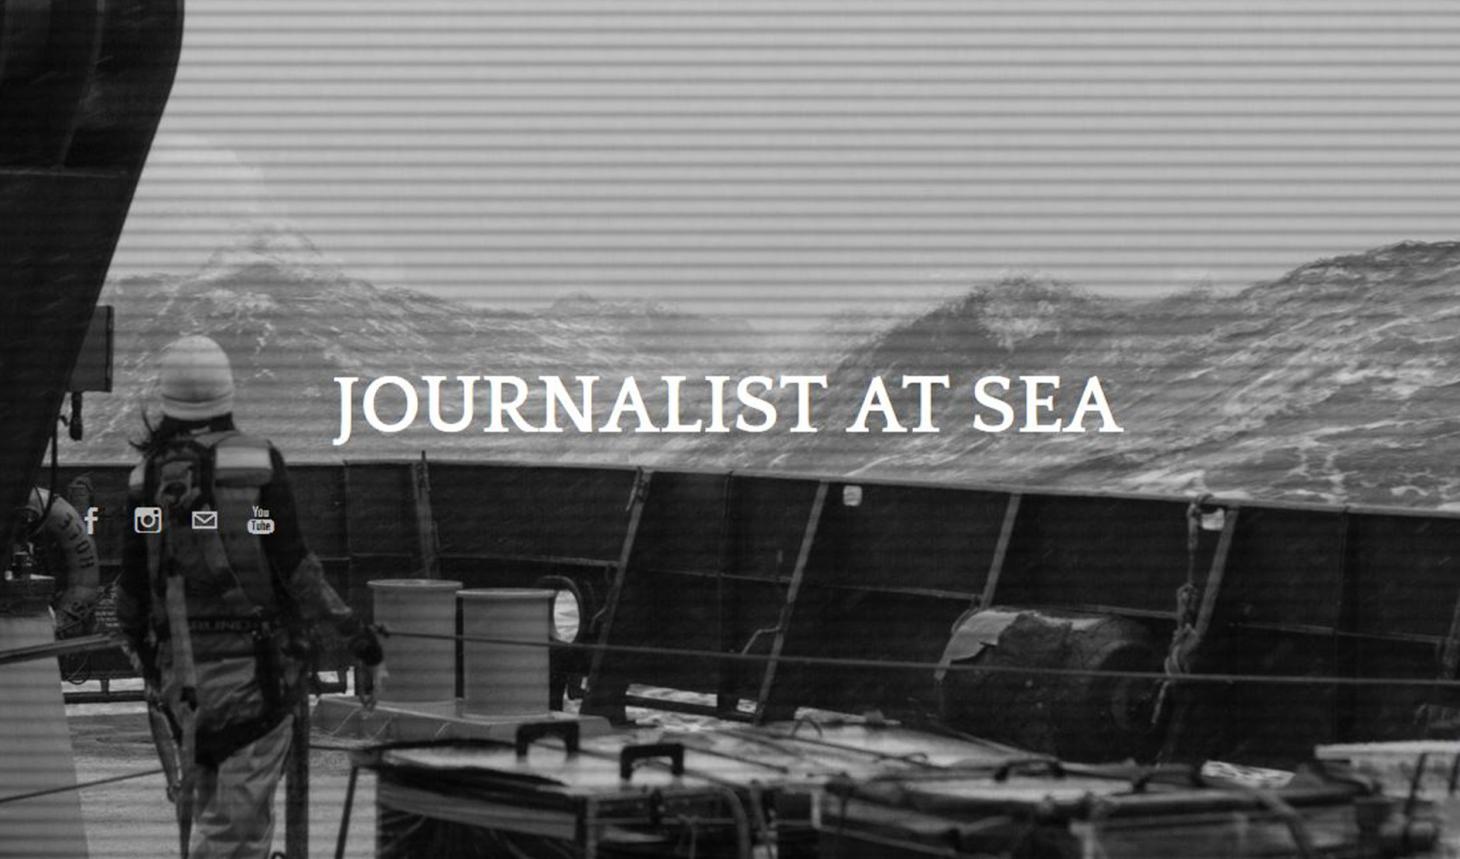 Photo of a crew member on a boat at sea in black and white, with "JOURNALIST AT SEA" title on the middle of image.